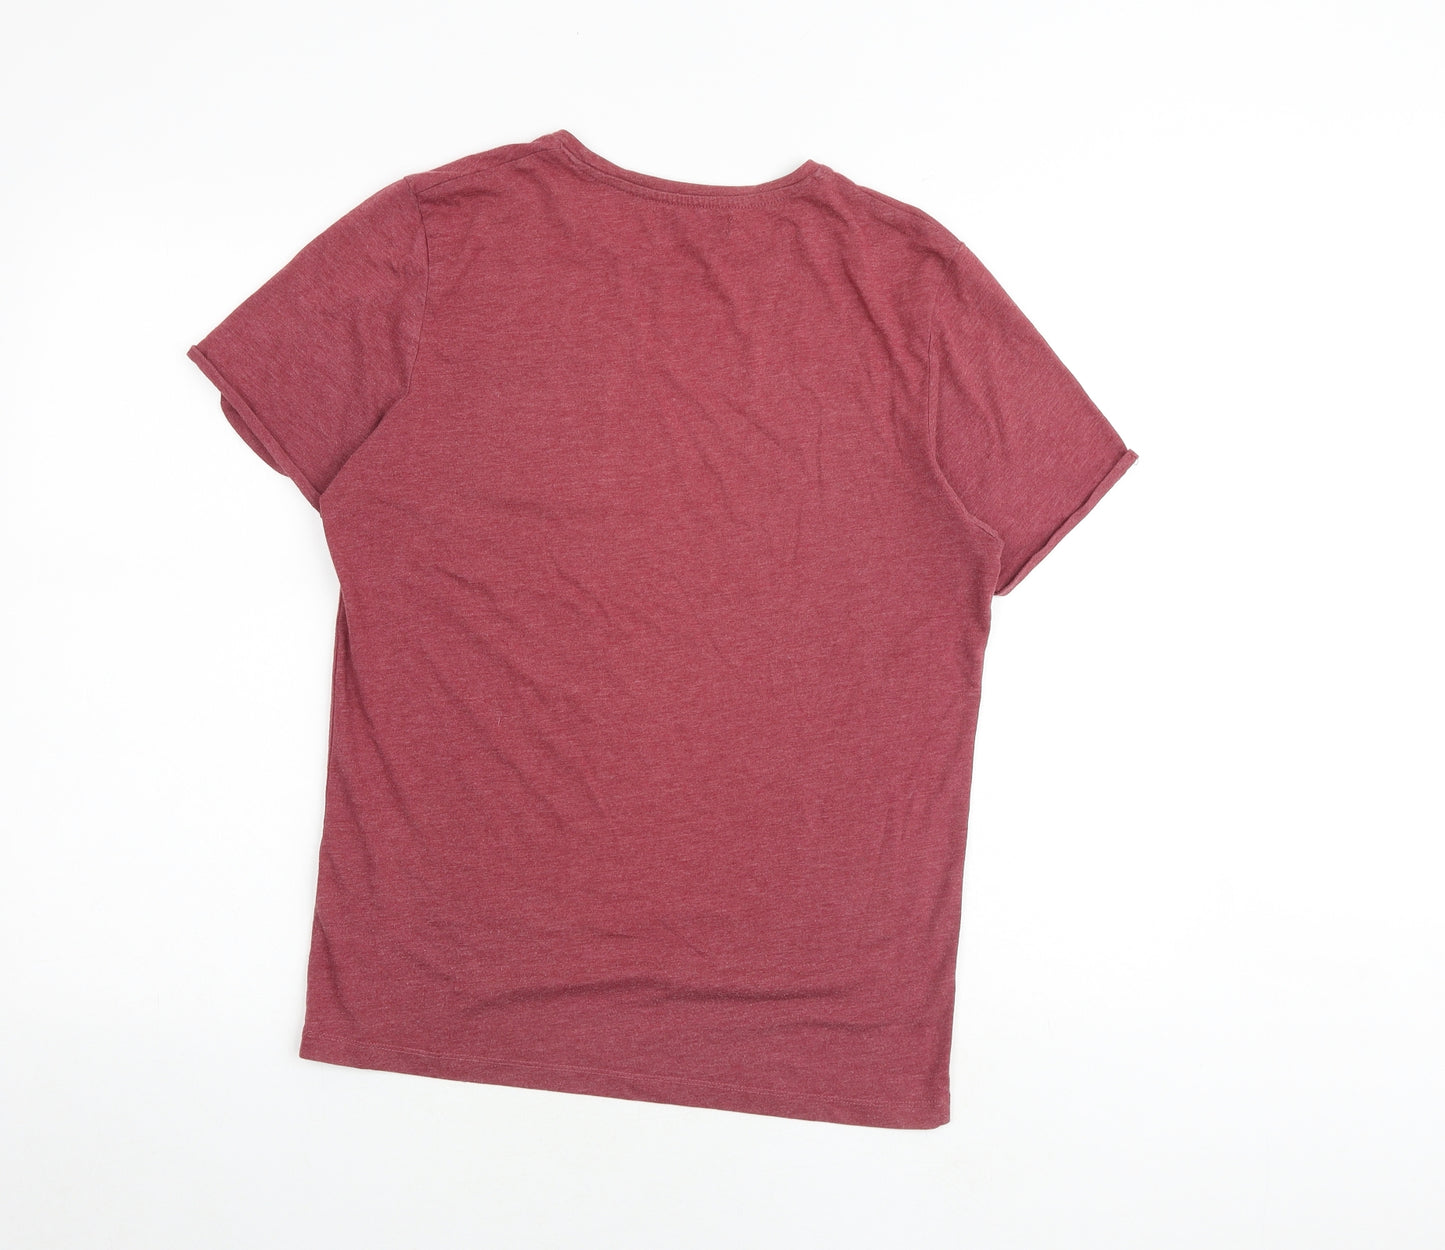 Blue Inc Mens Red Polyester T-Shirt Size S Round Neck